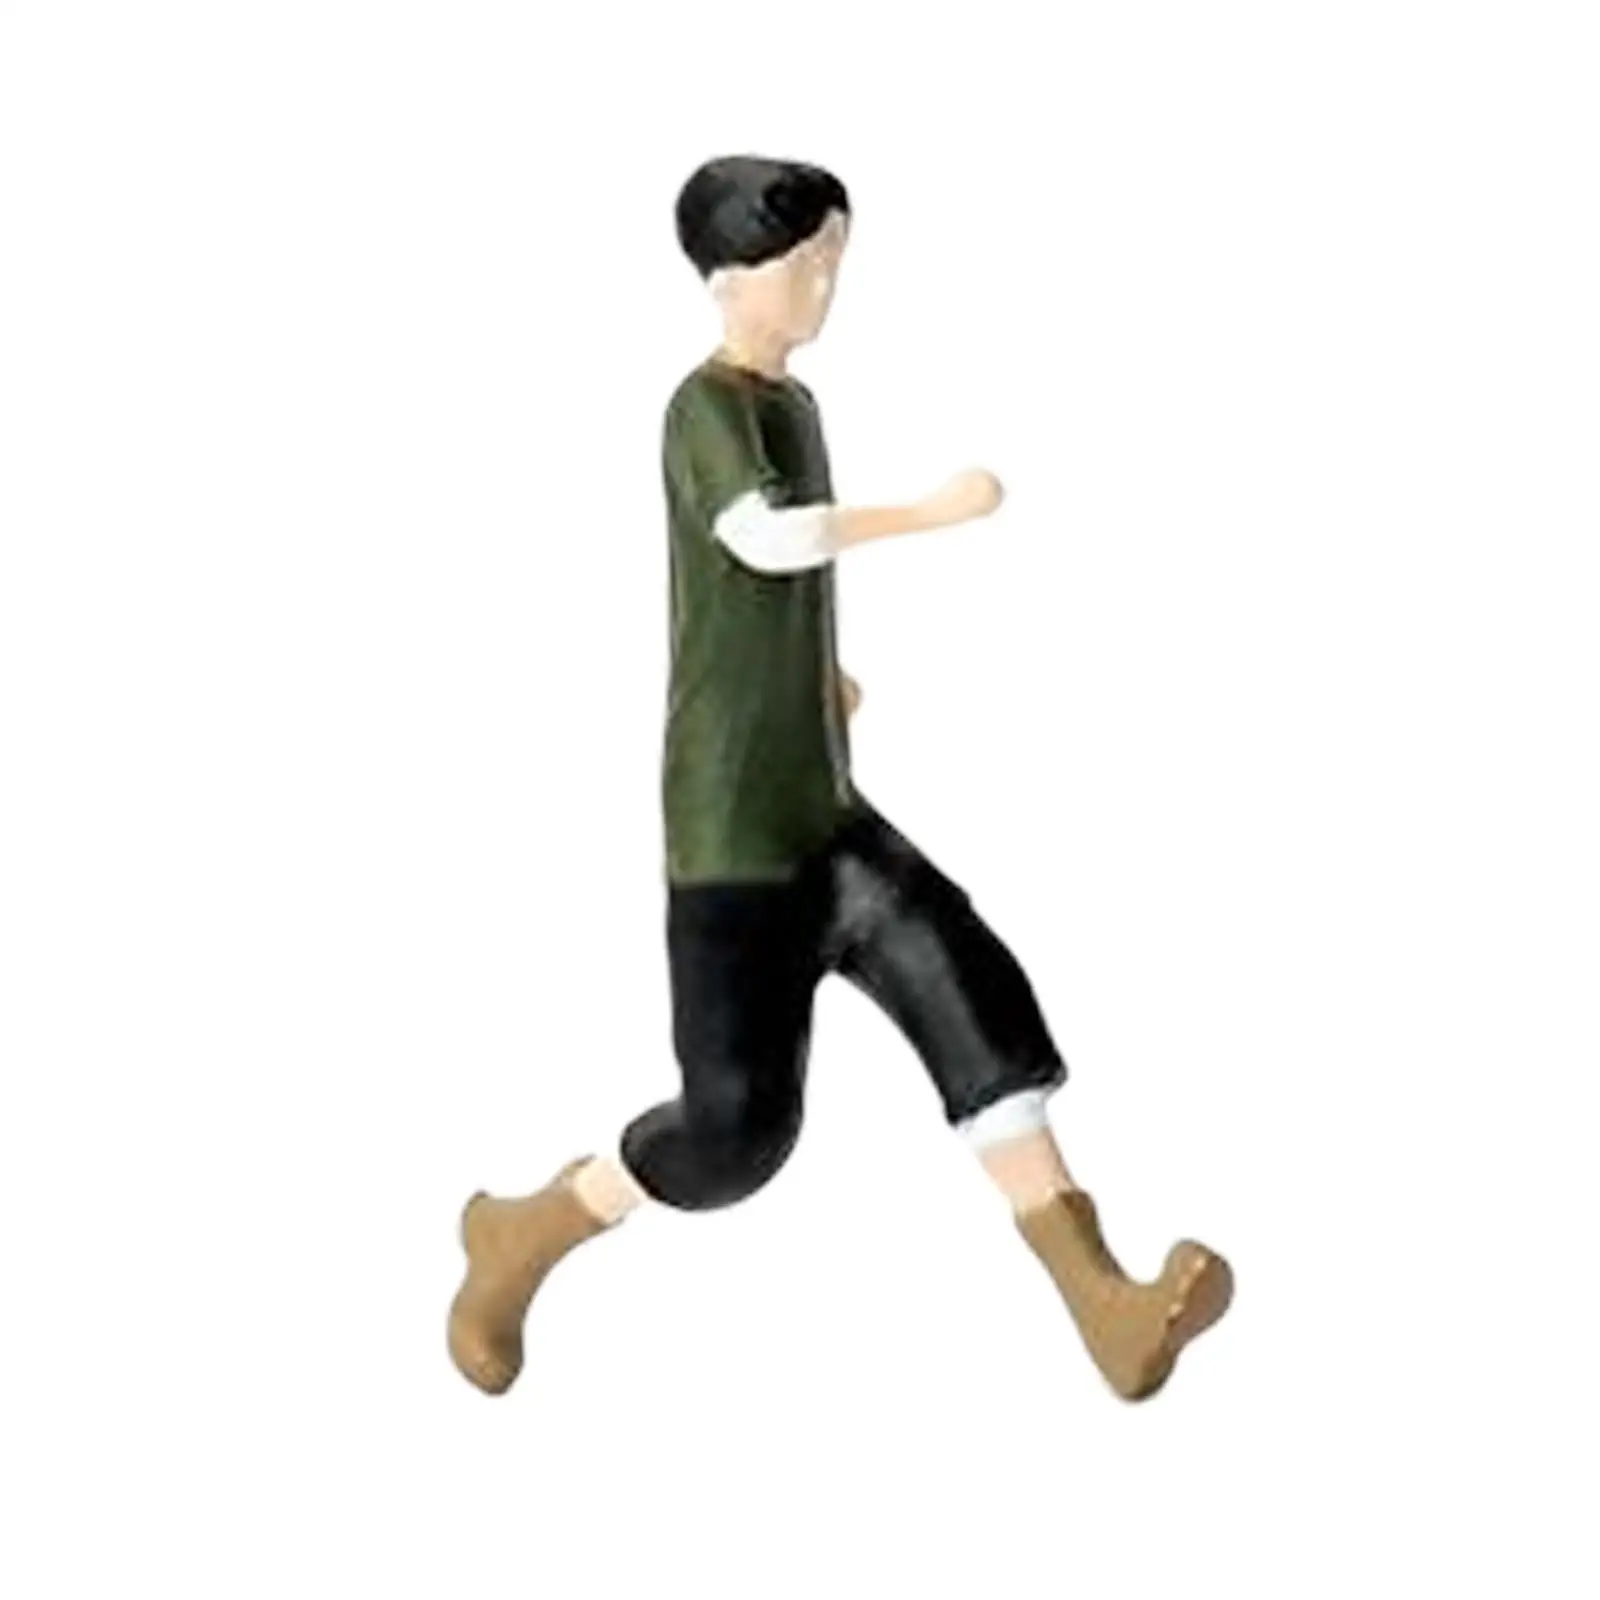 Miniature 1/64 Scale Model Toy Tiny Running Boy for Dollhouse Decor Collectibles